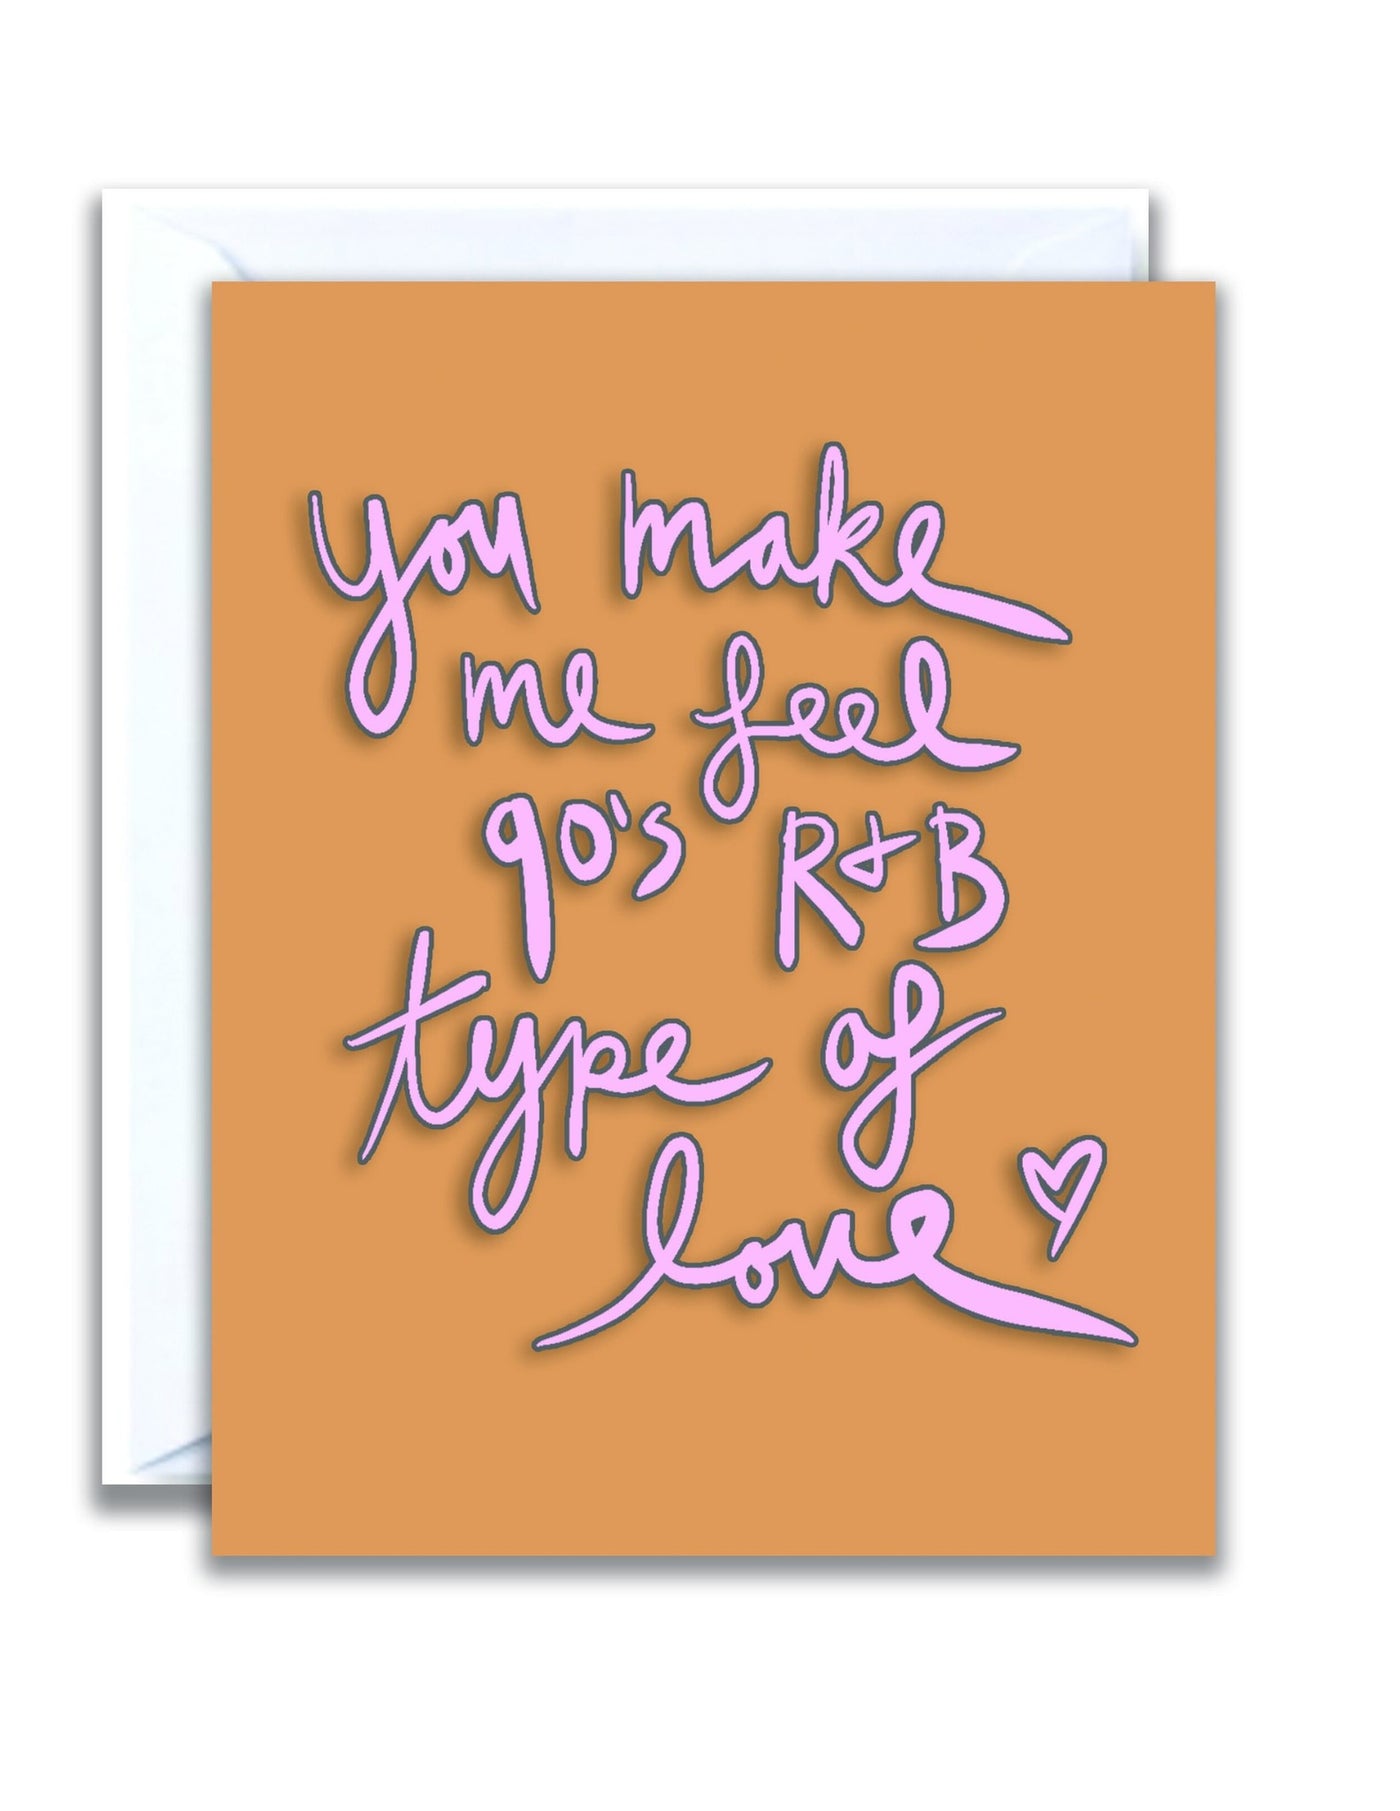 flo and syd 90s type of love card